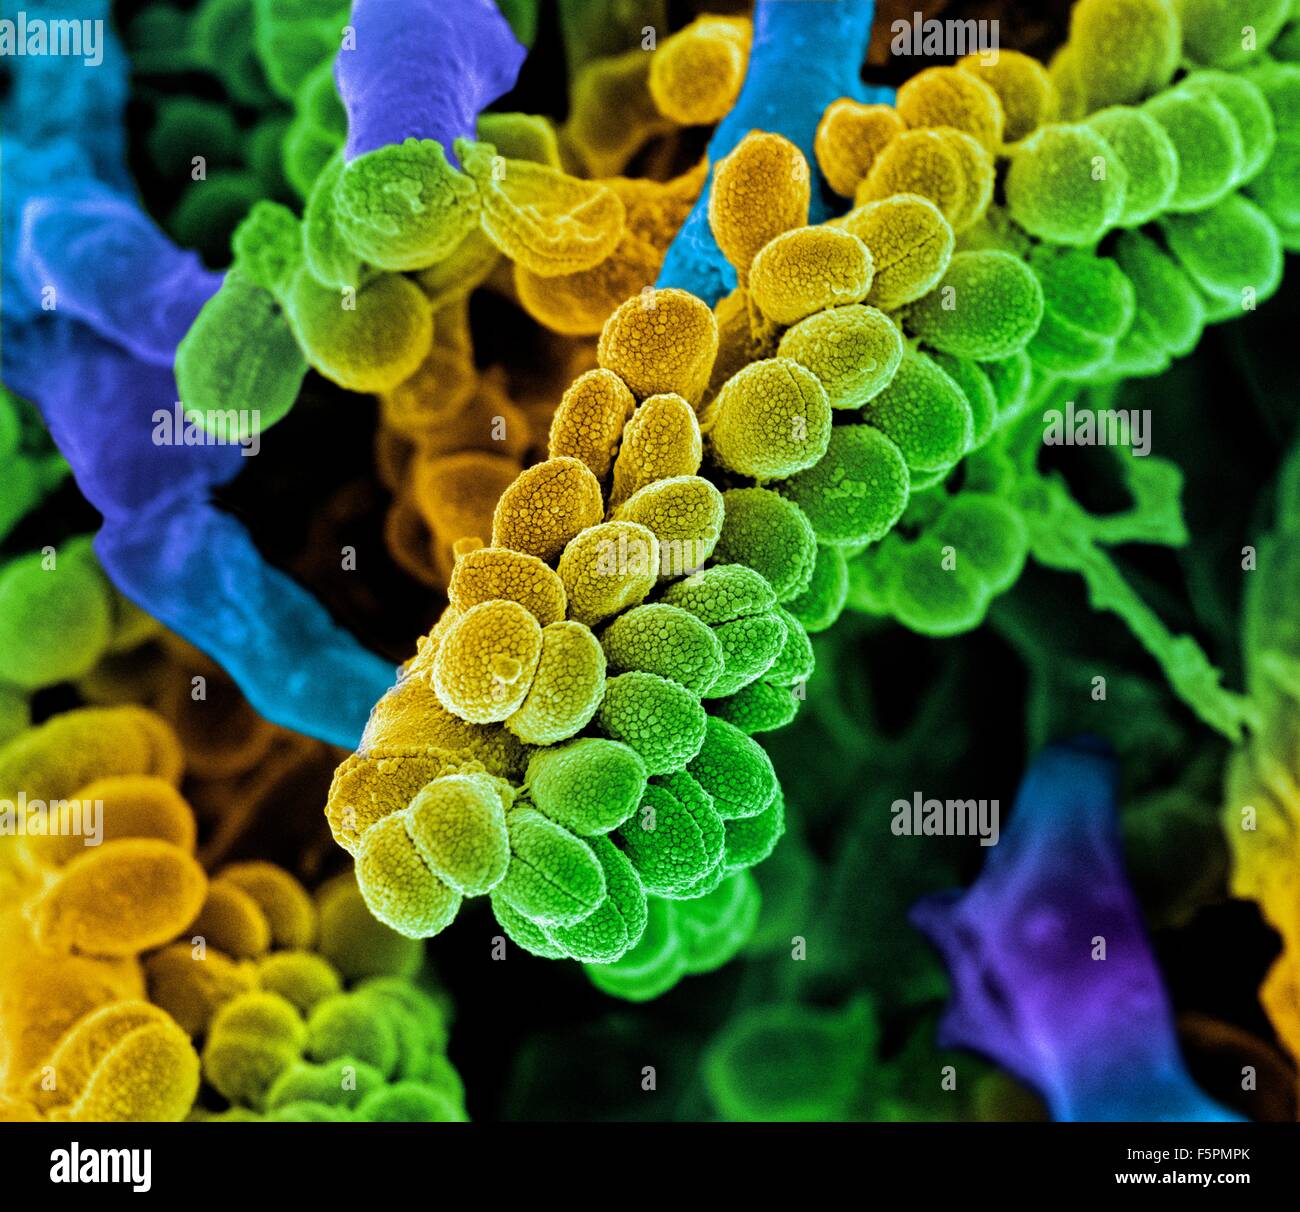 Streptococcus bacteria. Coloured scanning electron micrograph (SEM) of chains of Streptococcus bacteria with Streptomyces Stock Photo